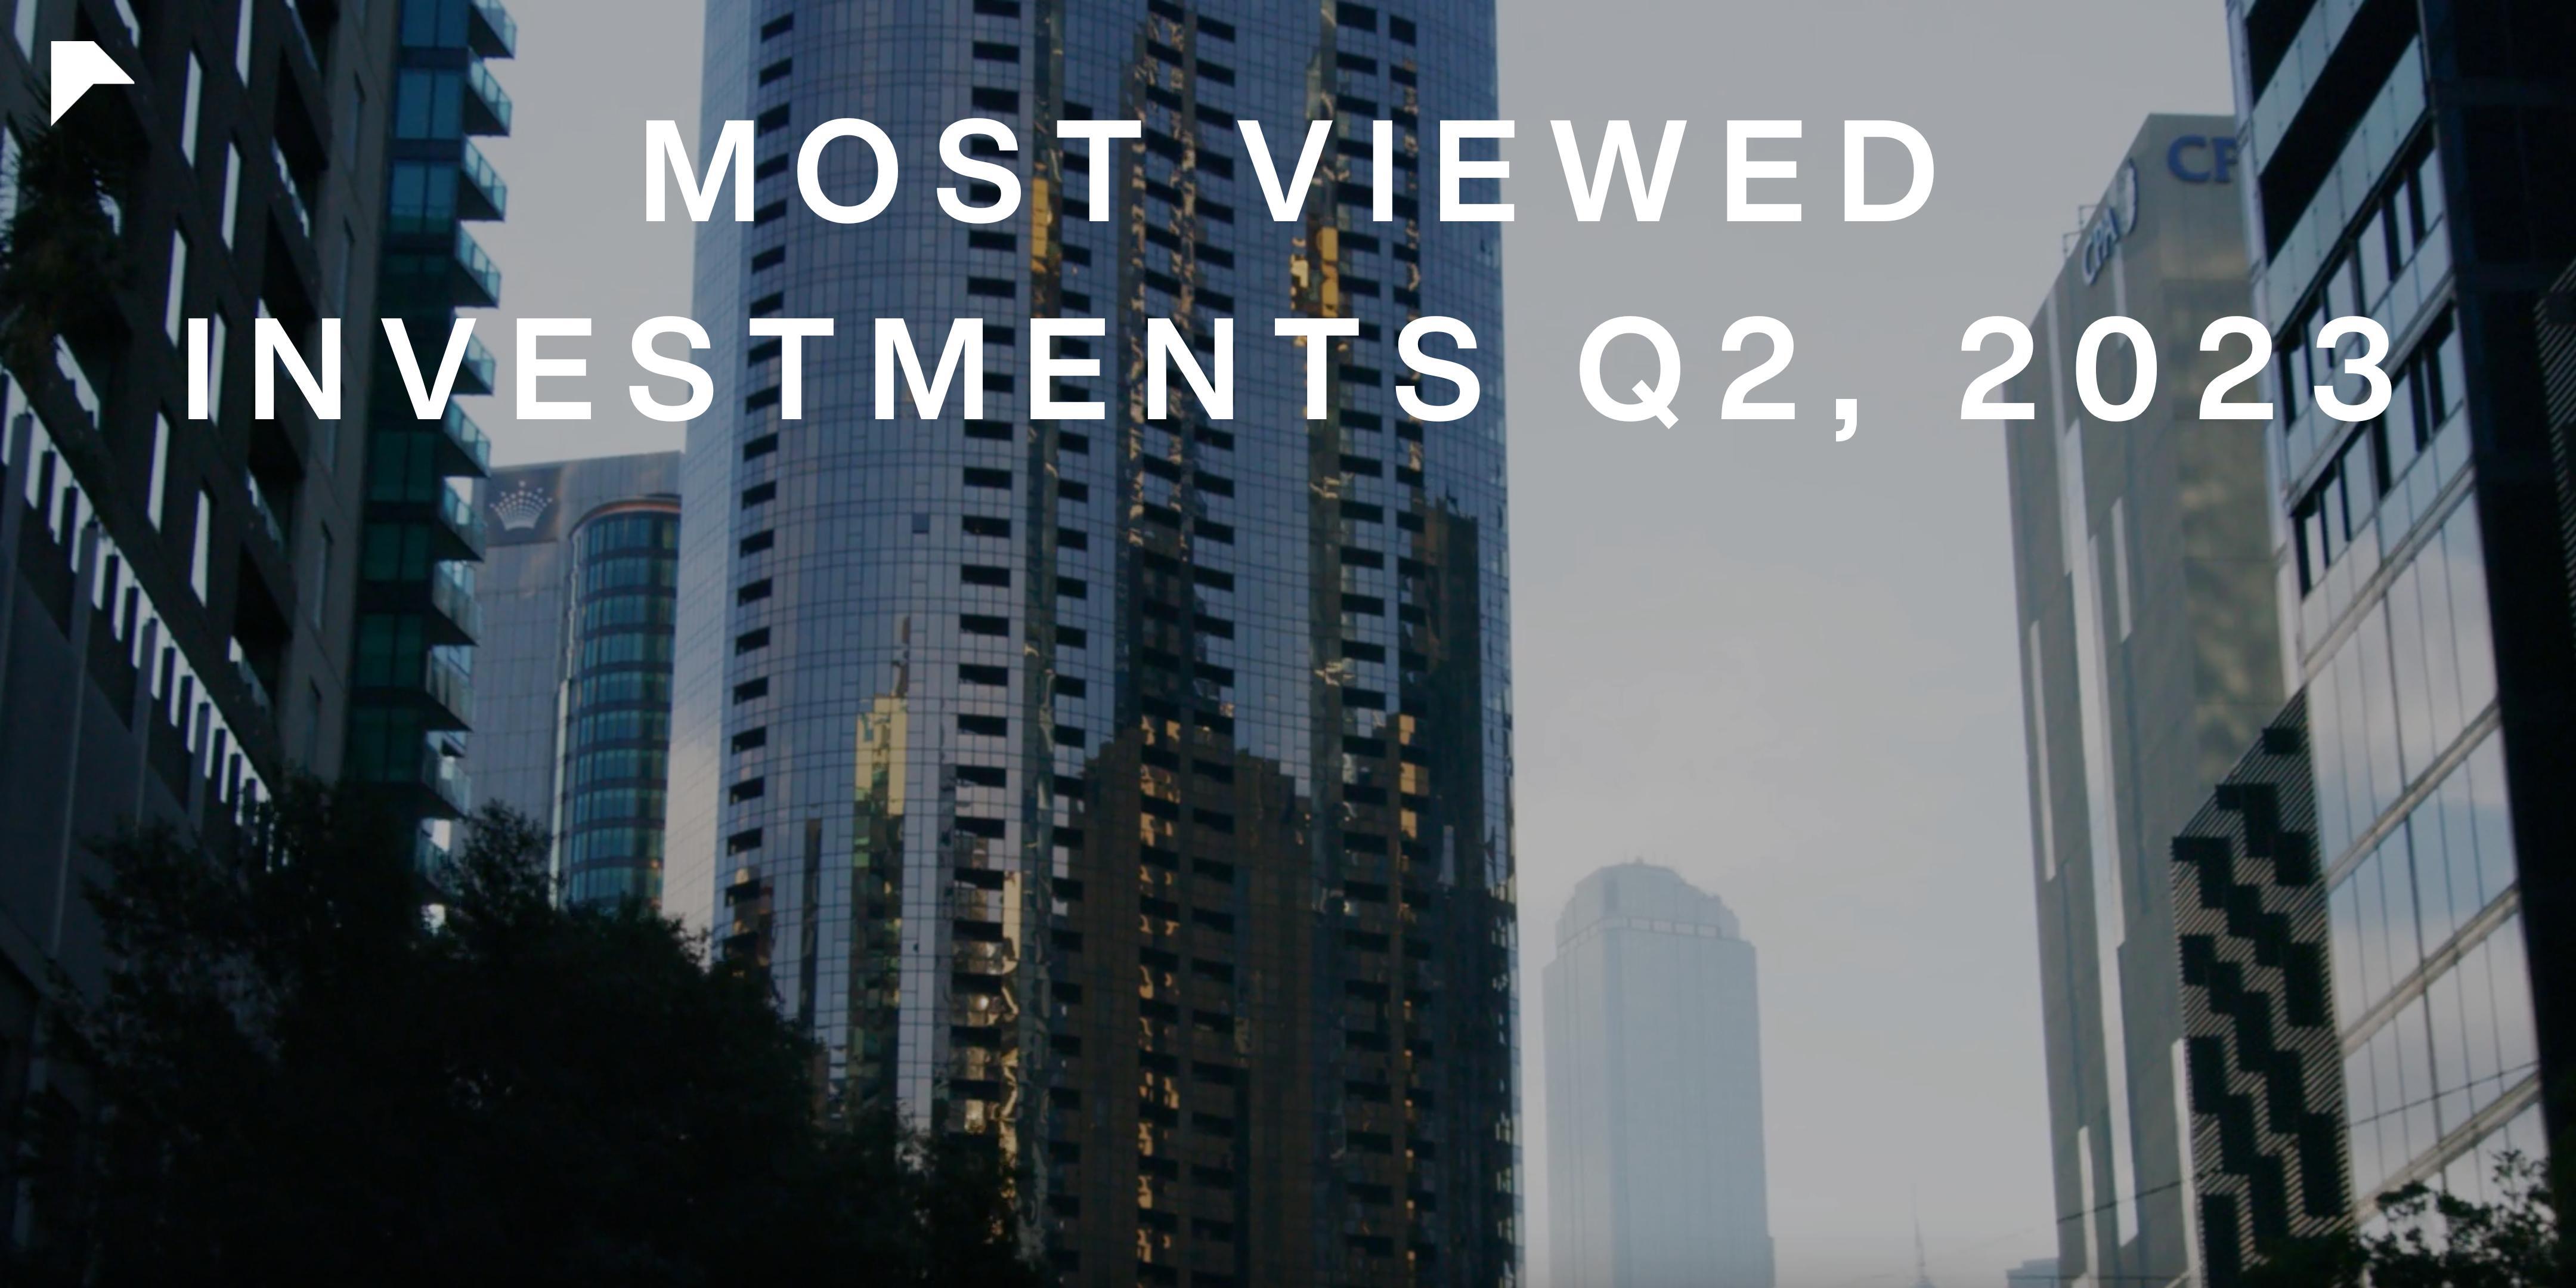 Our 10 Most Viewed Investment Opportunities Q2